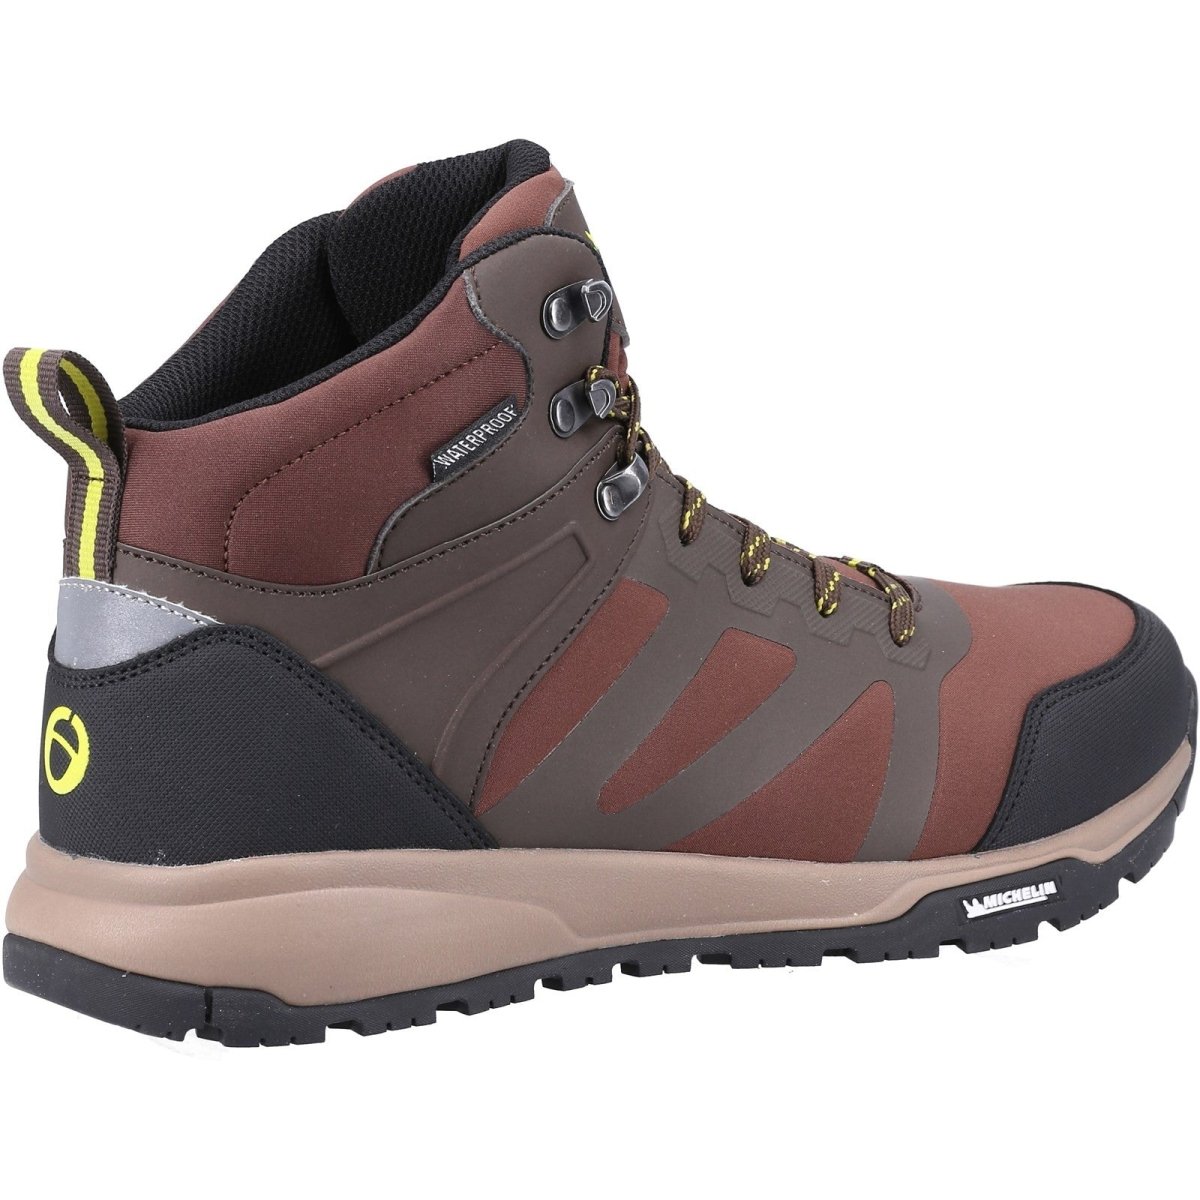 Cotswold Kingham Mid Mens Eco-Friendly Waterproof Hiking Boots - Shoe Store Direct